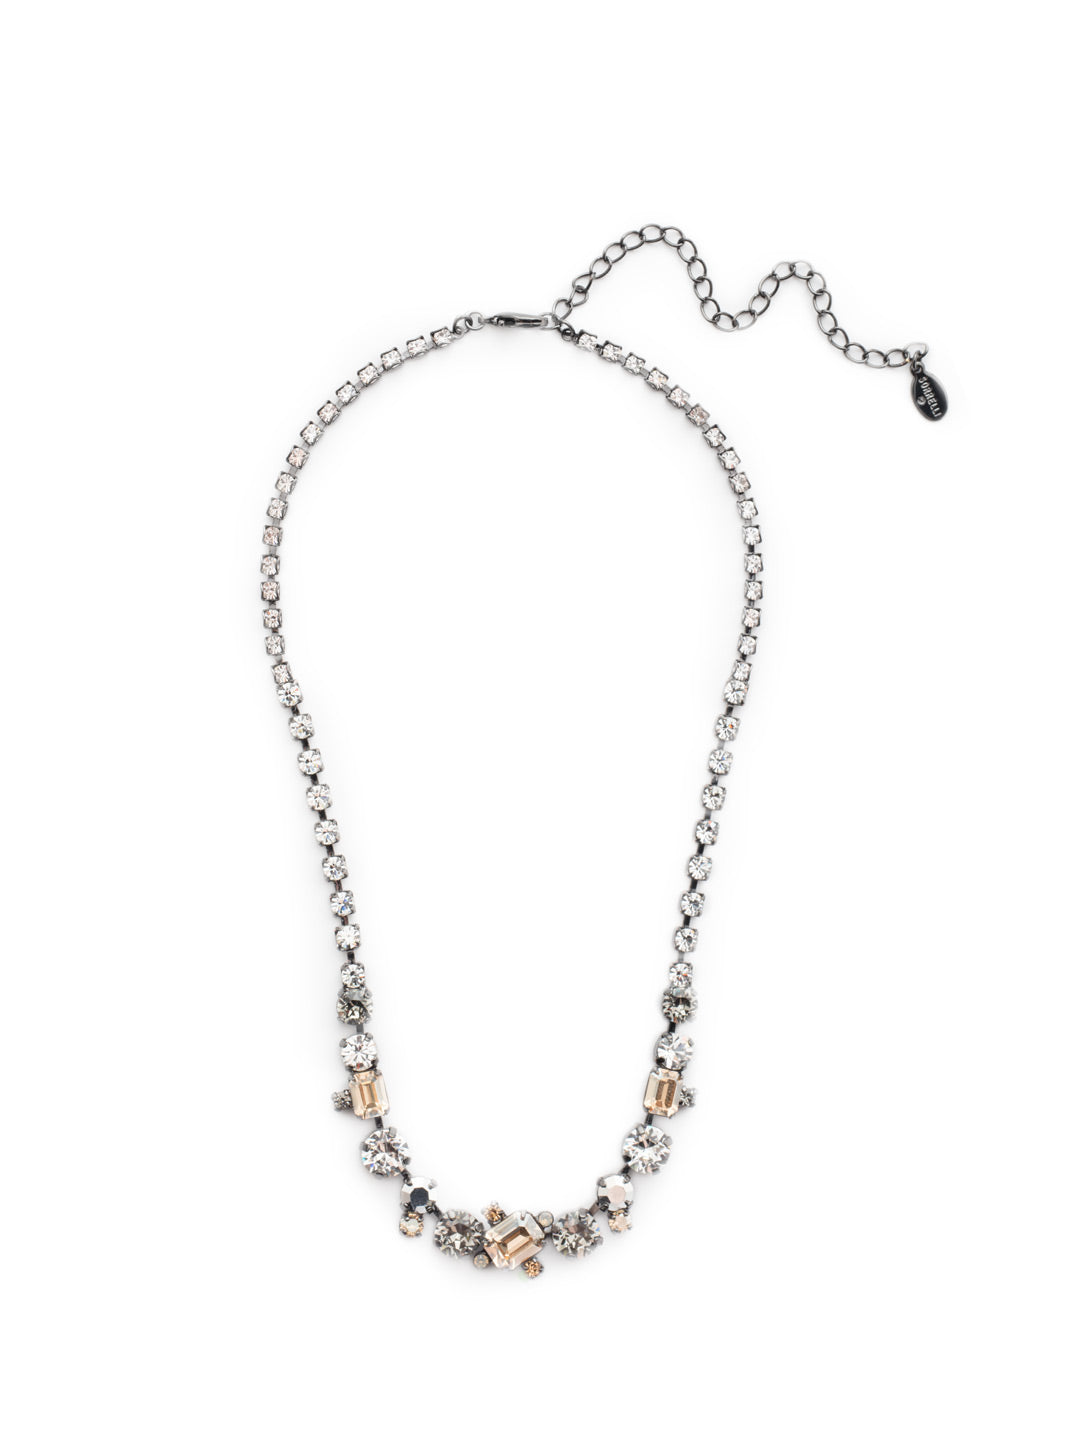 Tinsley Tennis Necklace - NEN17GMGNS - The Tinsley Statement Necklace exudes drama. Every inch is encrusted in sparkling crystals competing to be noticed. Fasten it on when you're looking for some attention. From Sorrelli's Golden Shadow collection in our Gun Metal finish.